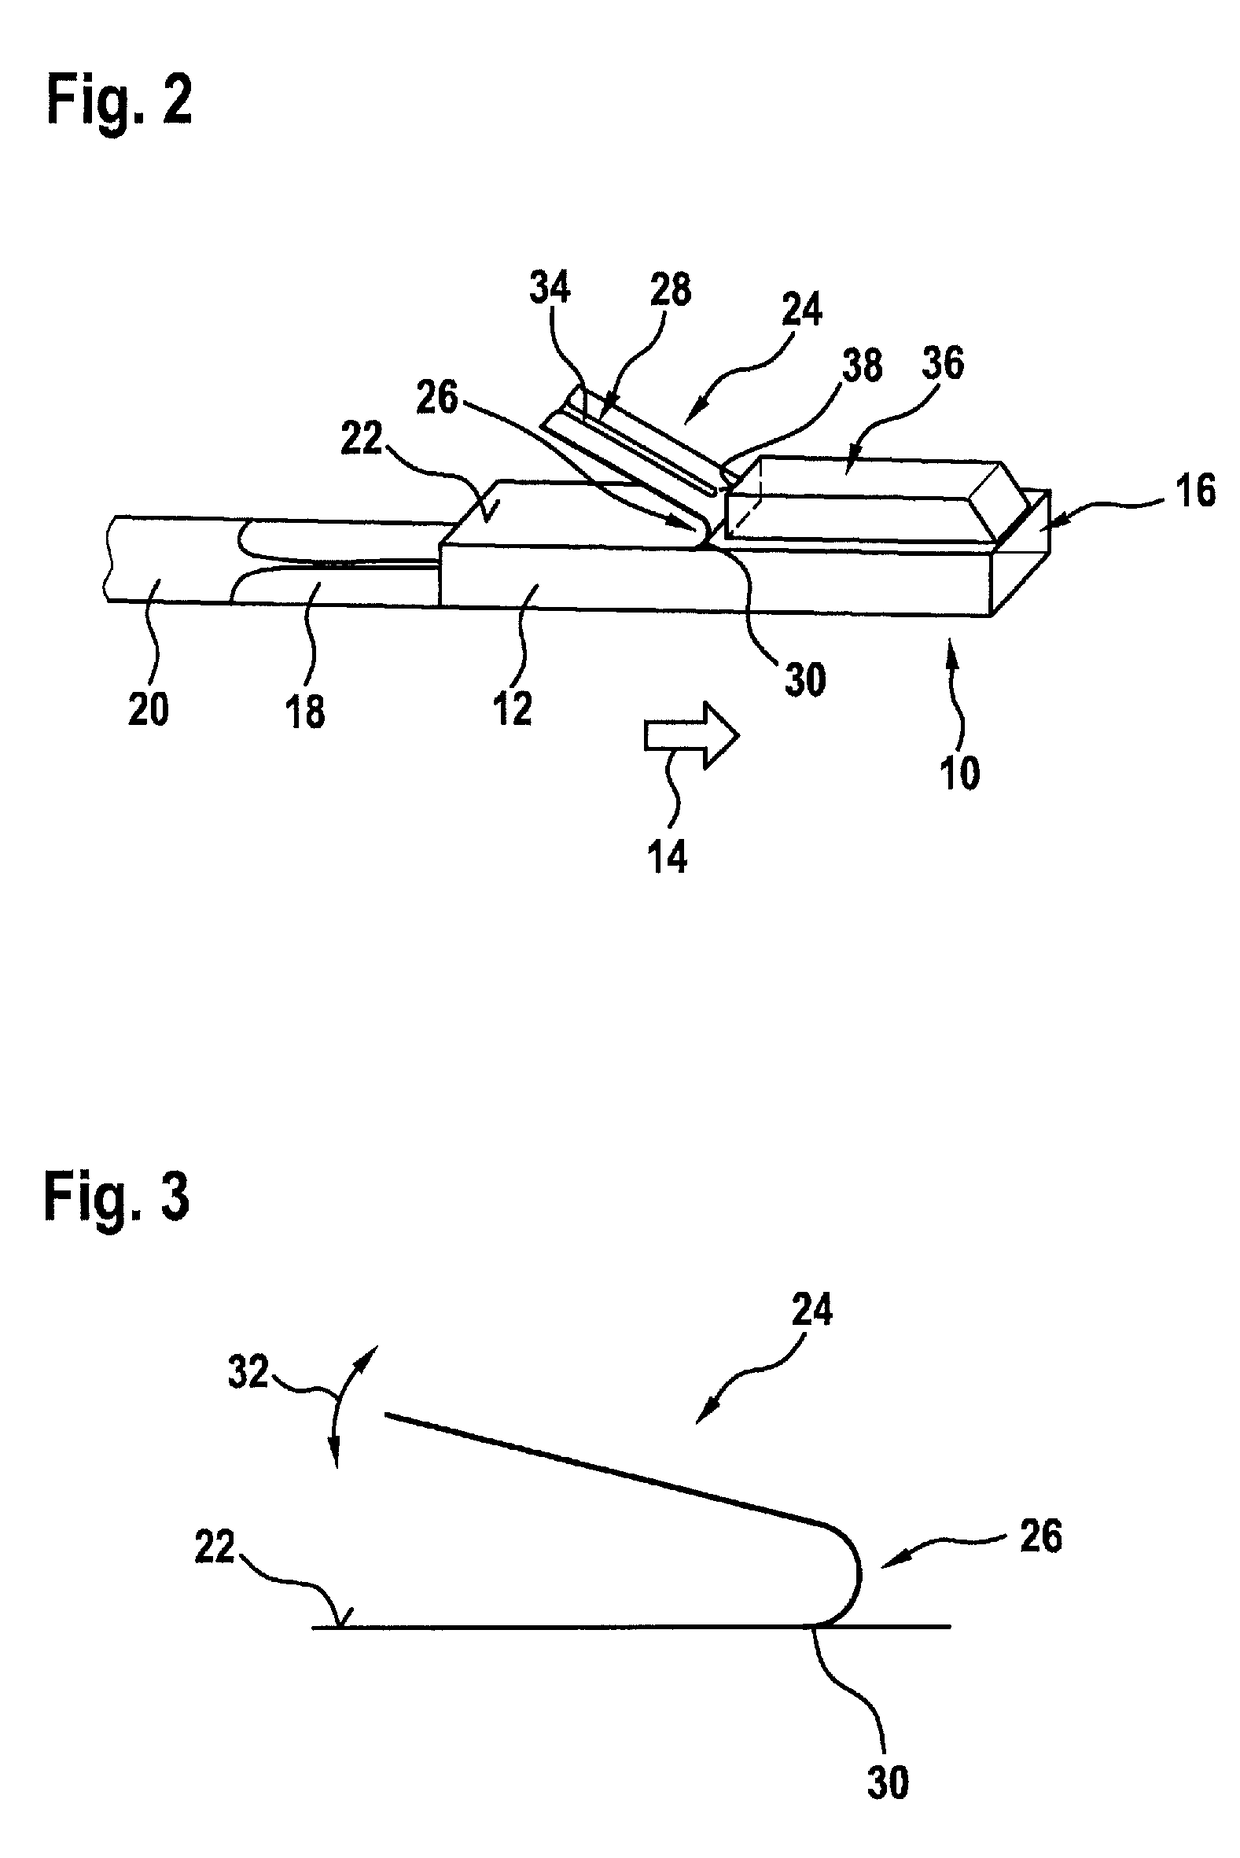 Connector assembly contact having an outwardly projecting primary lance